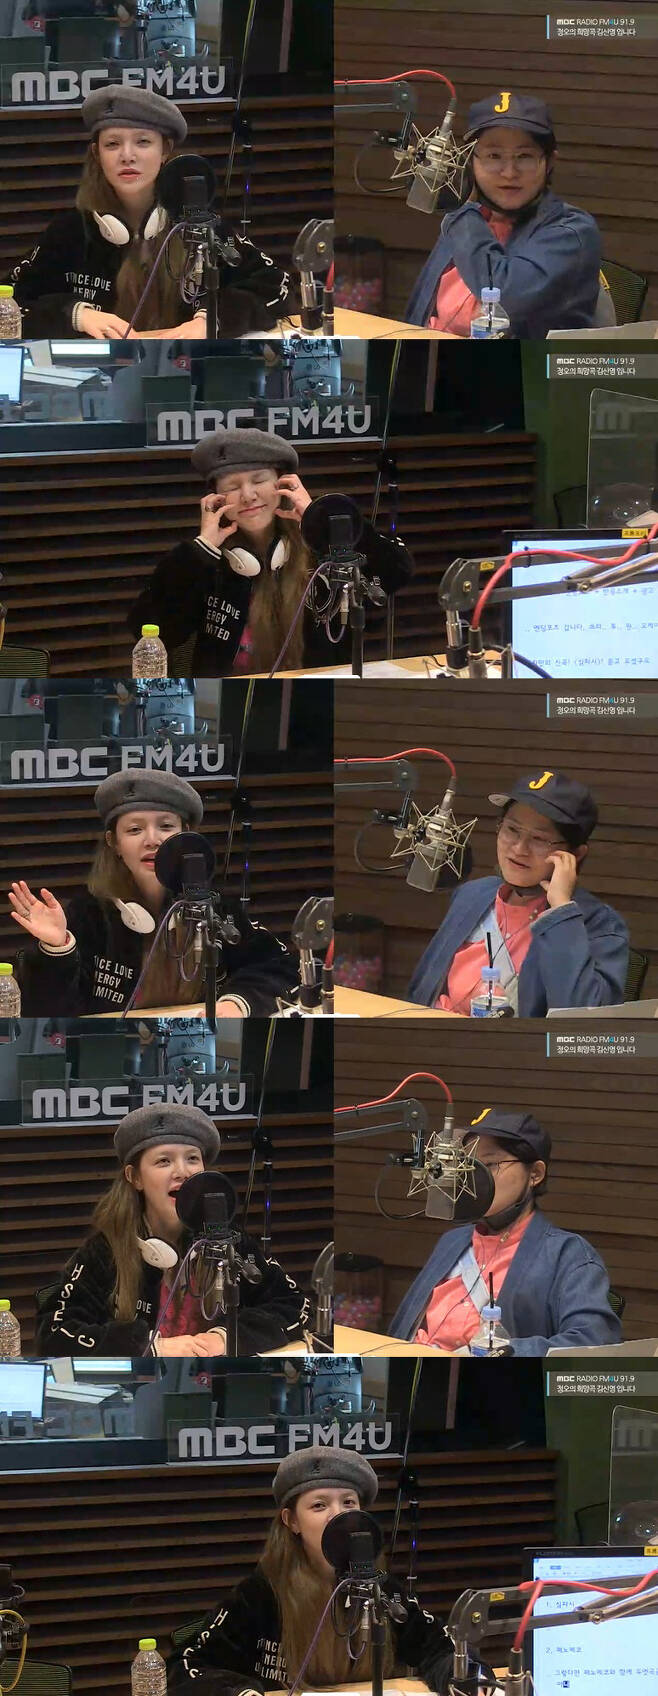 Elf Princess Rane Jimin returns to Solo after two years of BladyMBC FM4U broadcast on the 8th Kim Shin-Young is the hope song of noon, Jimin from AOA appeared as a guest.Jimin recently returned with the release of his first EP album BOXES.About the recent situation during the break, Jimin said, I started Diet. I gained a lot of weight and tried to lose a little.Kim Shin-Young said, I asked him why he did this, and he asked me to put water in it. Kim Shin-Young said, Why do you ask that?Jimin said, I wanted to share it with you.Regarding the meaning of his first solo album, Jimin said, Its meant to let go of the past and become a new me. Its not as fancy as before, but I think its an album that can be a little more honest.The title song Sympathy means sympathy and compassion. Jimin said that he made an album with this song, It means that I will leave the past and be a different person and show everything.Jimin, who was in charge of rap at the time of the AOA activity, returned to vocals. When did you practice vocals? Jimin said, There was a little Blady.It was not a time to stop for two years, but it was time for me to run. My best friend Kim Shin-Young said, I remember Jimin, who was going slowly but little by little. Im proud and touched that the album is with me.At Kim Shin-Youngs request for an ending pose, Jimin posed as Ball Heart. When Kim Shin-Young said, Thats been a while, Jimin said, I guess Im still stuck in the past.The listener asked, Did Jimin tell Kim Shin-Young the songs in advance? Kim Shin-Young blurred, I used to play the contest song. Im not an emotionalist.Jimin said, Sister is very cold and hardcore to me. Kim Shin-Young said, I need such feedback to work well. I do not usually talk about it.Jimin said, I wanted to sing a song that was flowing, but Sister said there should be a wow point. I told her not to let it go.Jimin, who chose Penomeco as an artist he wanted to work with. Jimin sent a love call to Penomeco, I would like to sing with you.Jimin, who chose Seolhyun among SeolhyunvsKim Shin-Young if he leaves Travel with one person. Jimin said, Shinyoung Sister is a great planner, so Travel is busy.If you go to Seolhyun and Travel, both lie down. Kim Shin-Young said, I feel like a retreat. Kim Shin-Young said, Who goes to Danang and wakes up at 1 oclock?I do not think I should take care of it, he said. So I got permission and woke up with breakfast. 